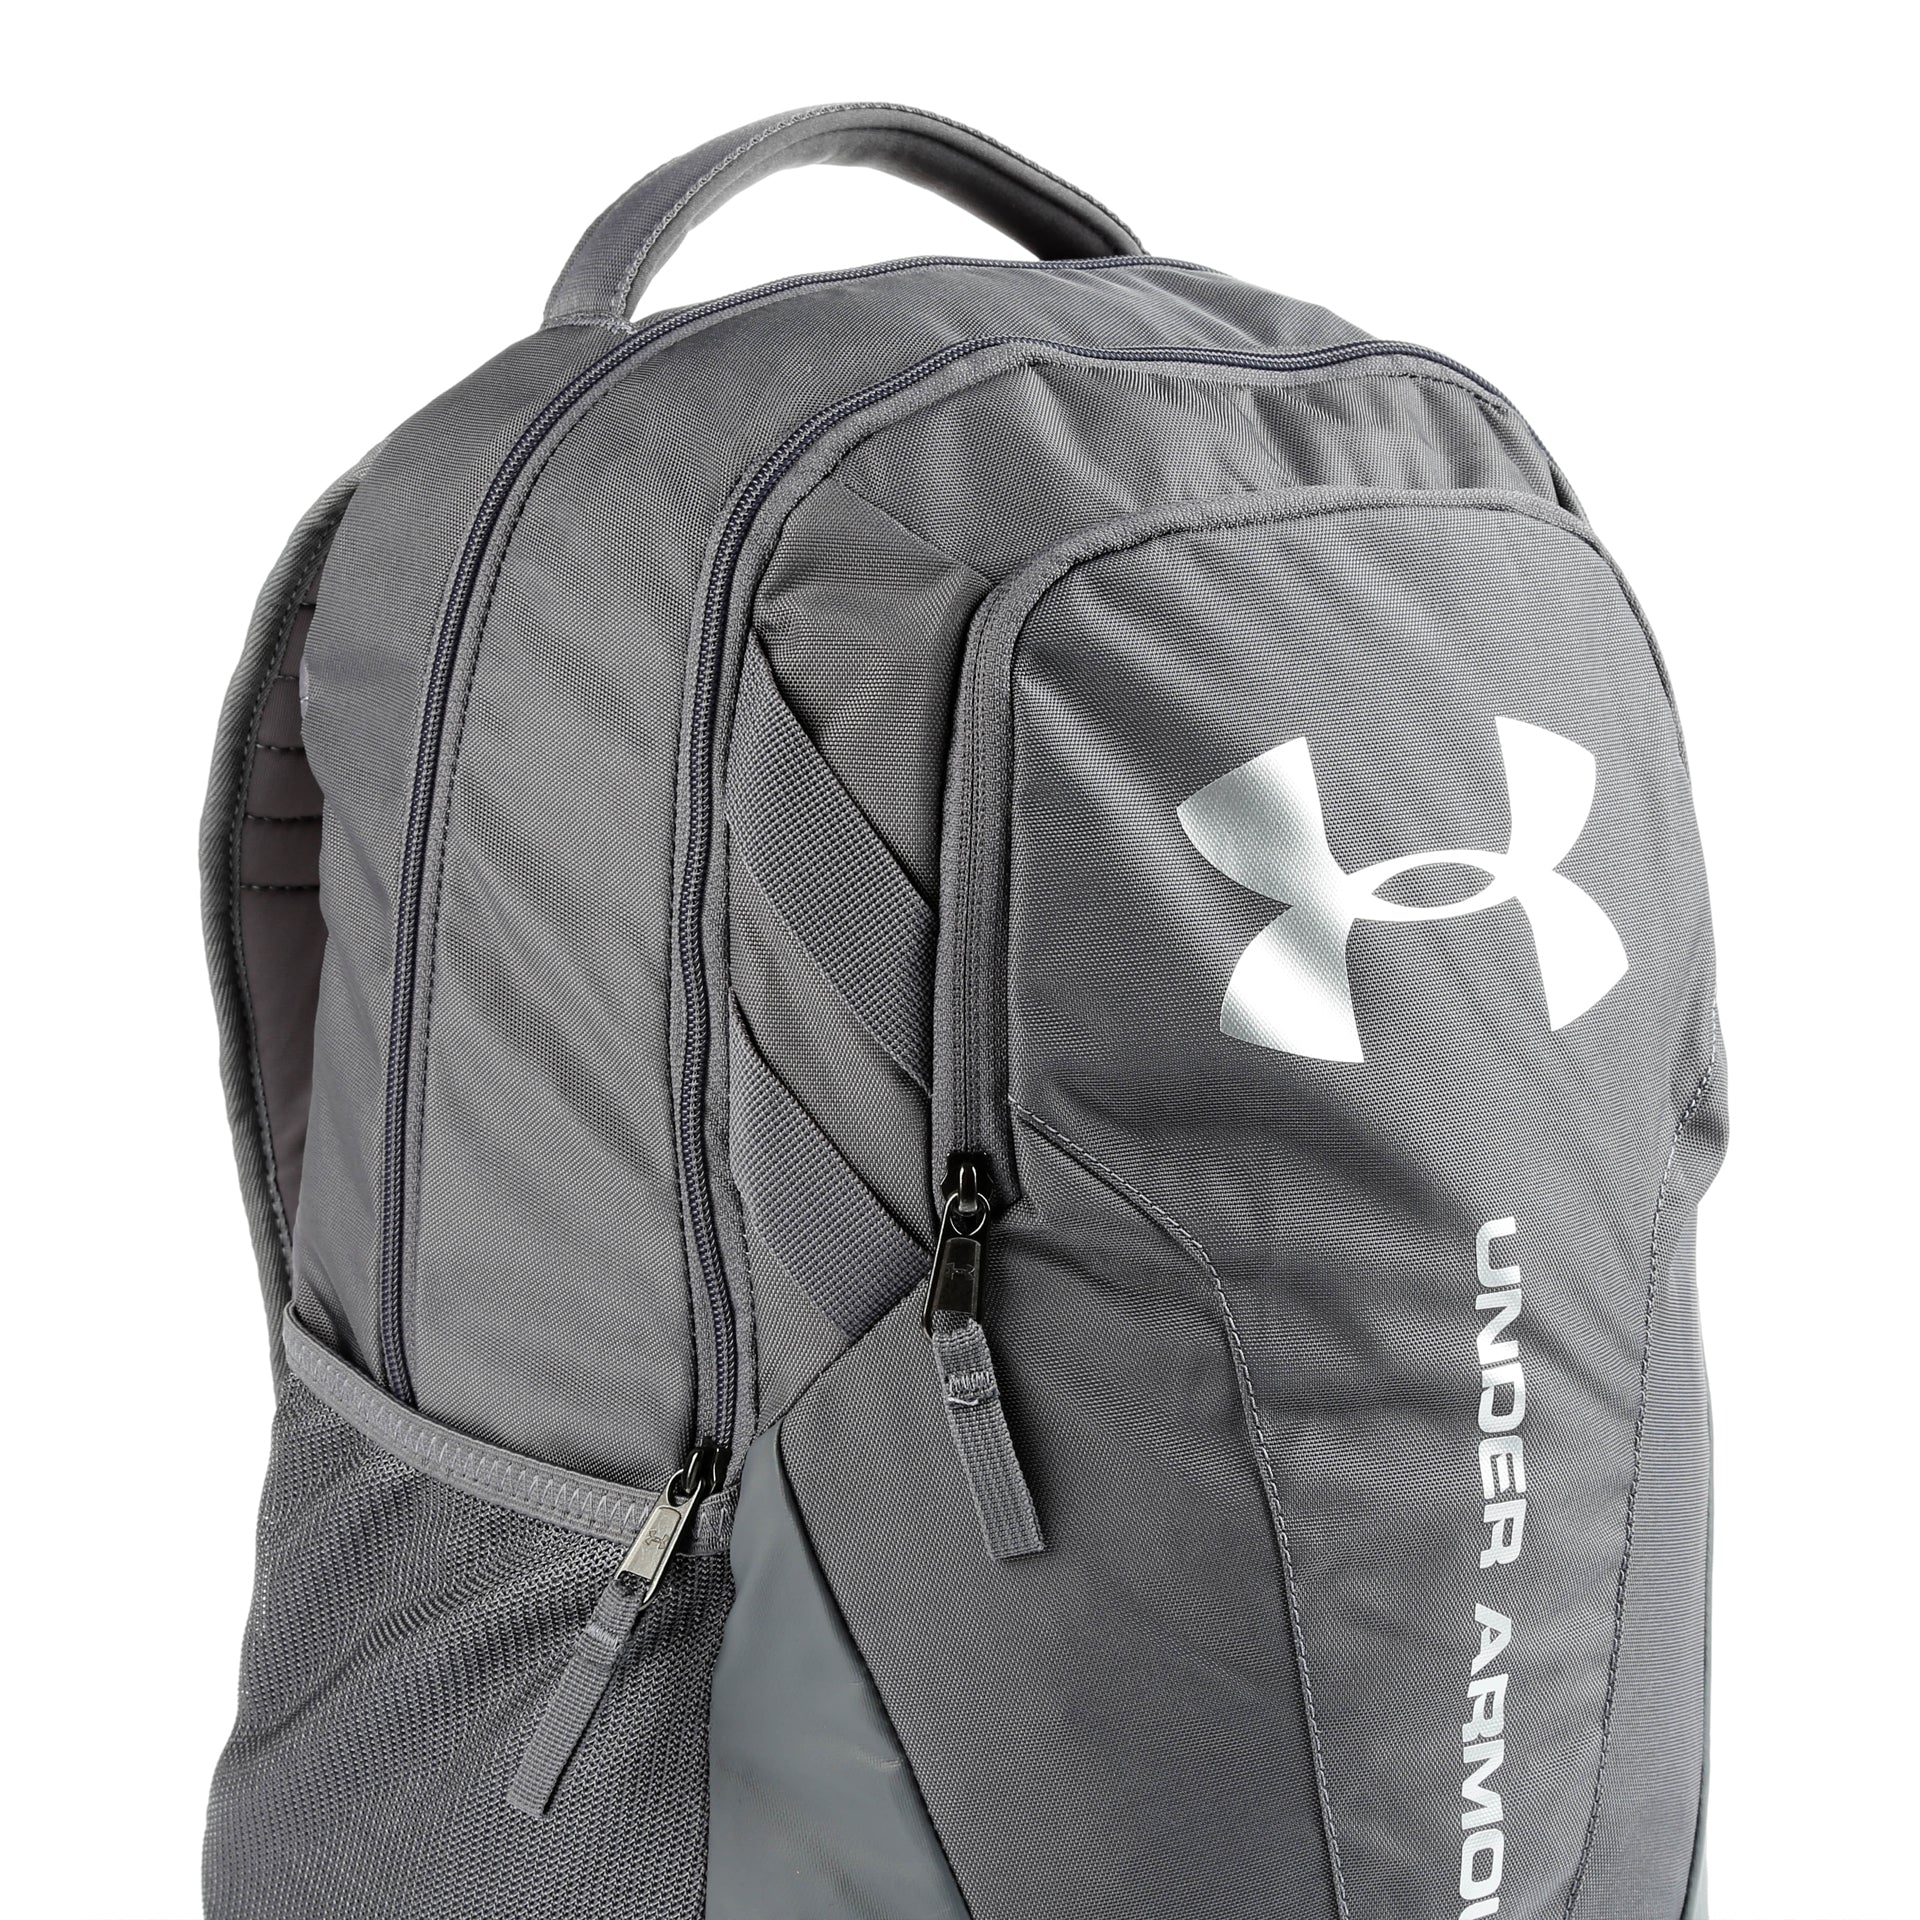 Under Armour Backpacks